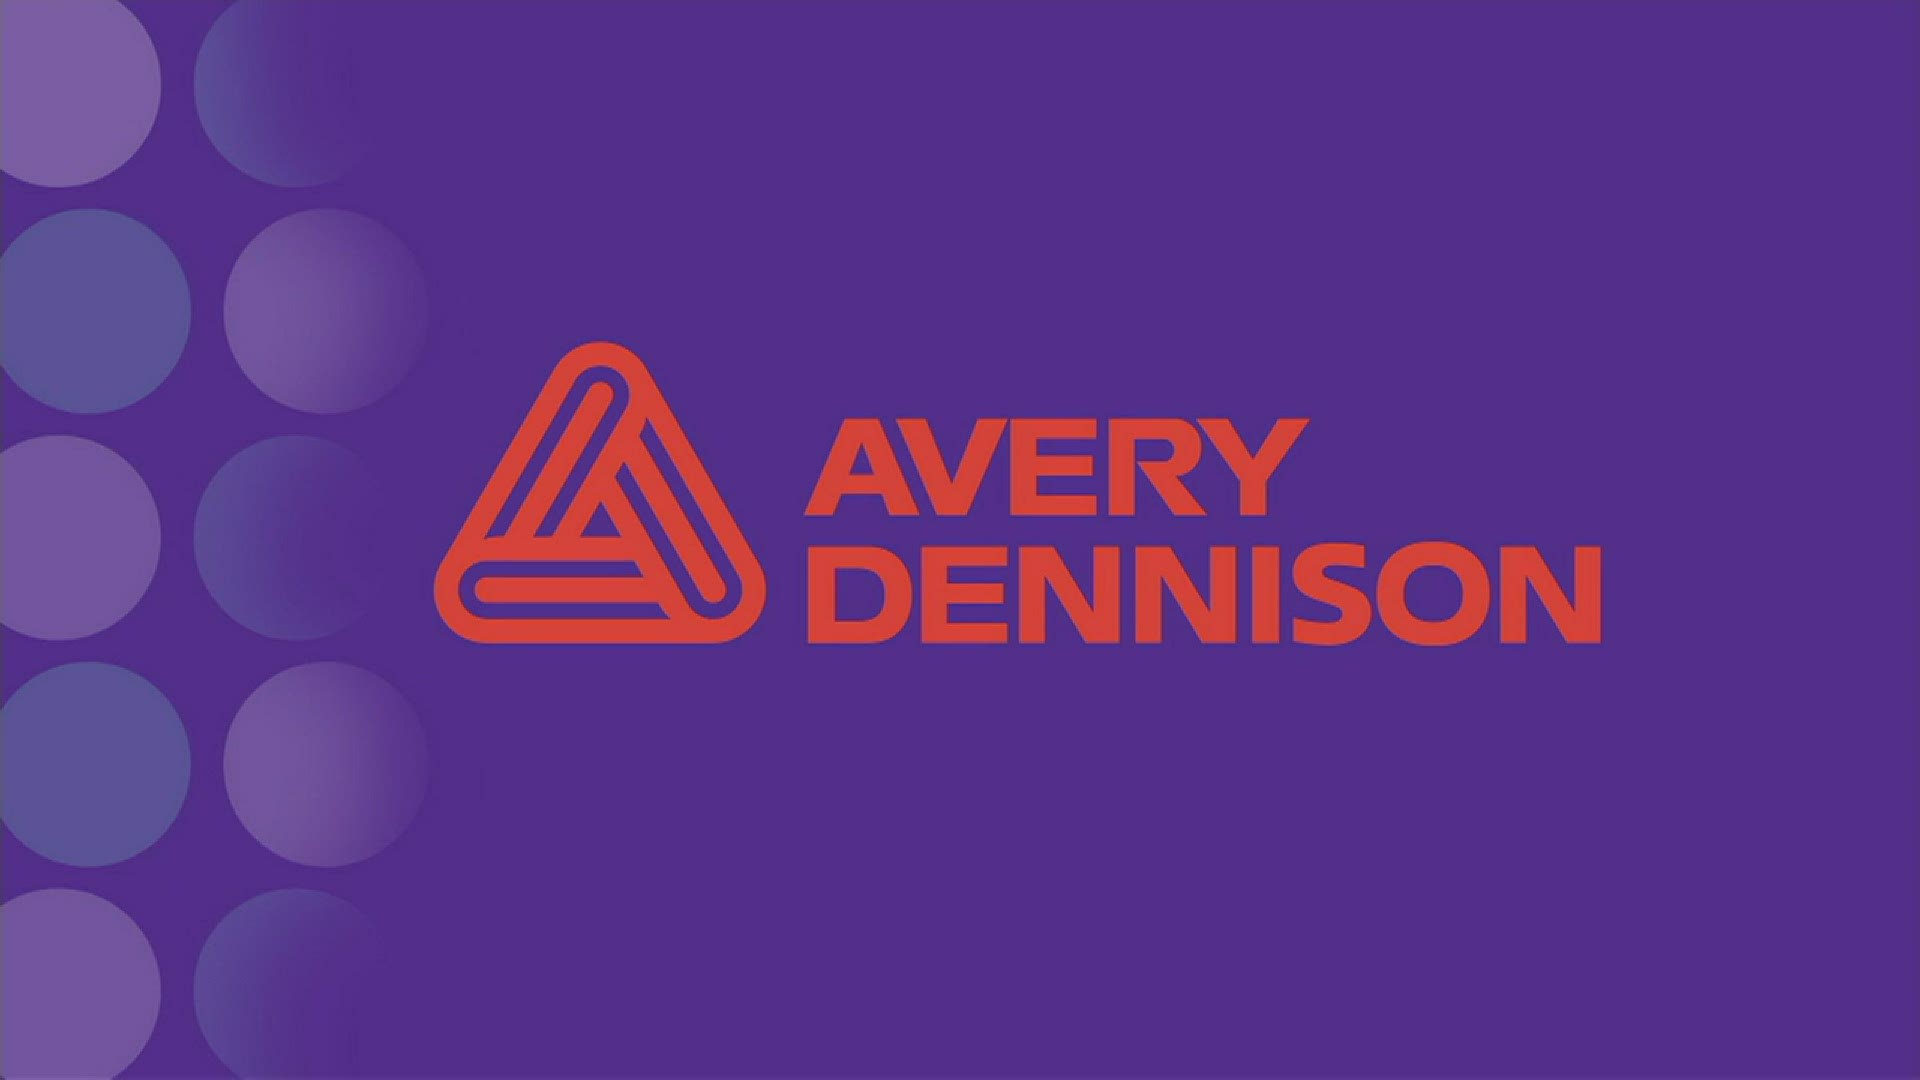 Alexa talks with Louise Sullivan about the important role she plays at Avery Dennison and how to drive innovation within a company.